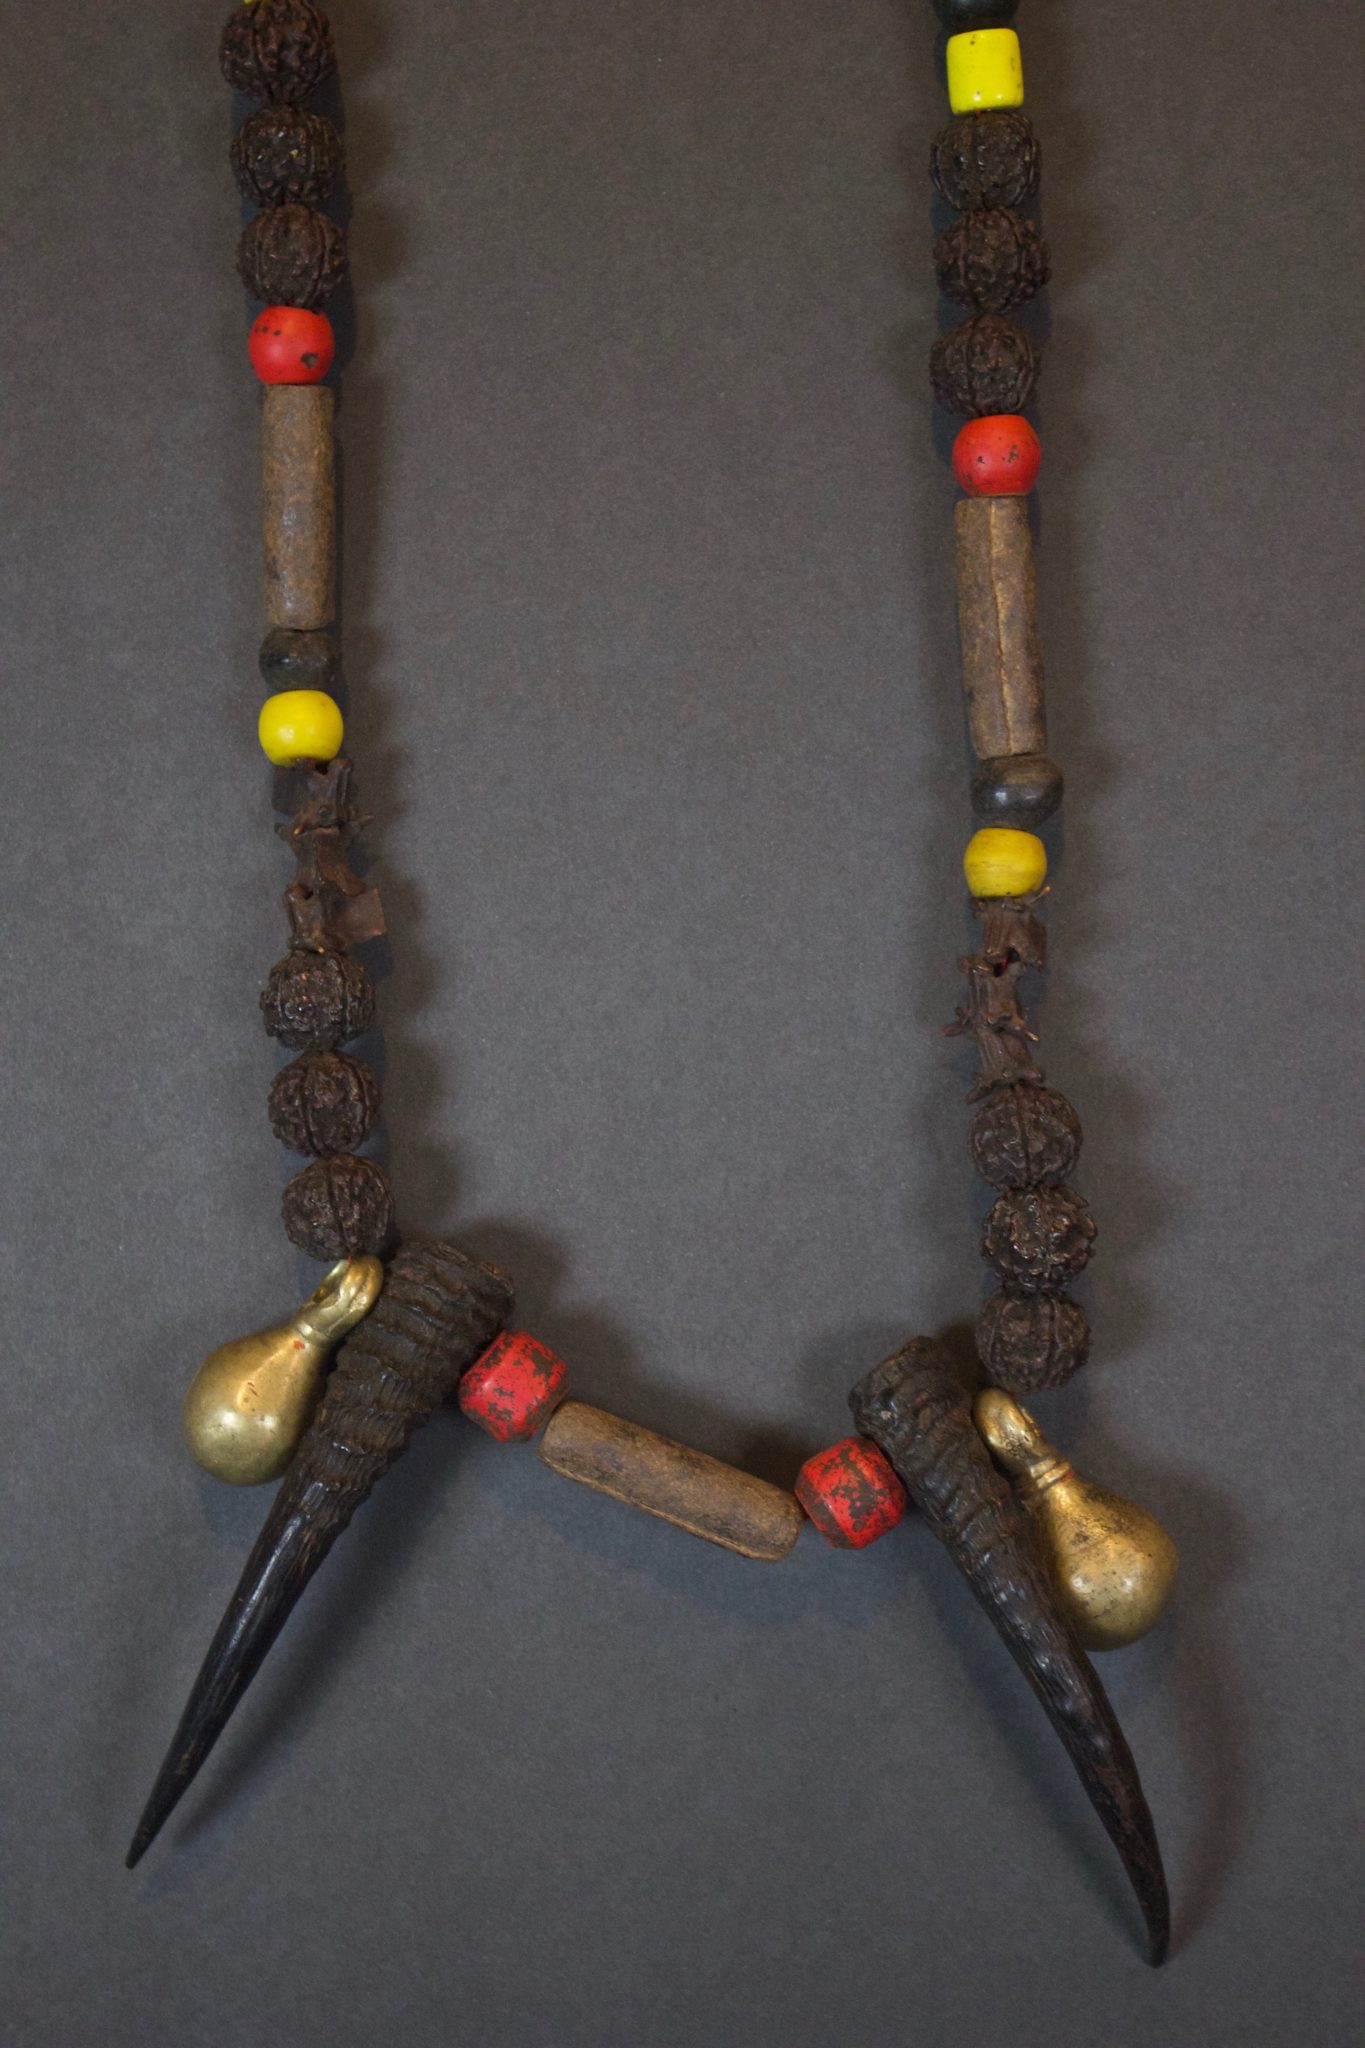 Naga Mala Shaman Necklace Nepal Late 19th c. Snake bone, rudraksha seeds, Himalayan goat horn, old European handmade glass trade beads, Brass crotal bells The Naga Mala are primarily used in healing ceremonies for protection and to connect the shaman with the sacred snake gods and goddesses who help inform their work. The preparation of the snake bones and necklace has an intricate sacred ritual to properly empower them. The Rudraksha (enlightened) seeds symbolize divine wisdom and are traditionally used as prayer beads. The bells make a sound that evoke ancestor spirits and helps the shaman transition into a trance state for ceremonies. 22” x 7” x 1 ¾” $750